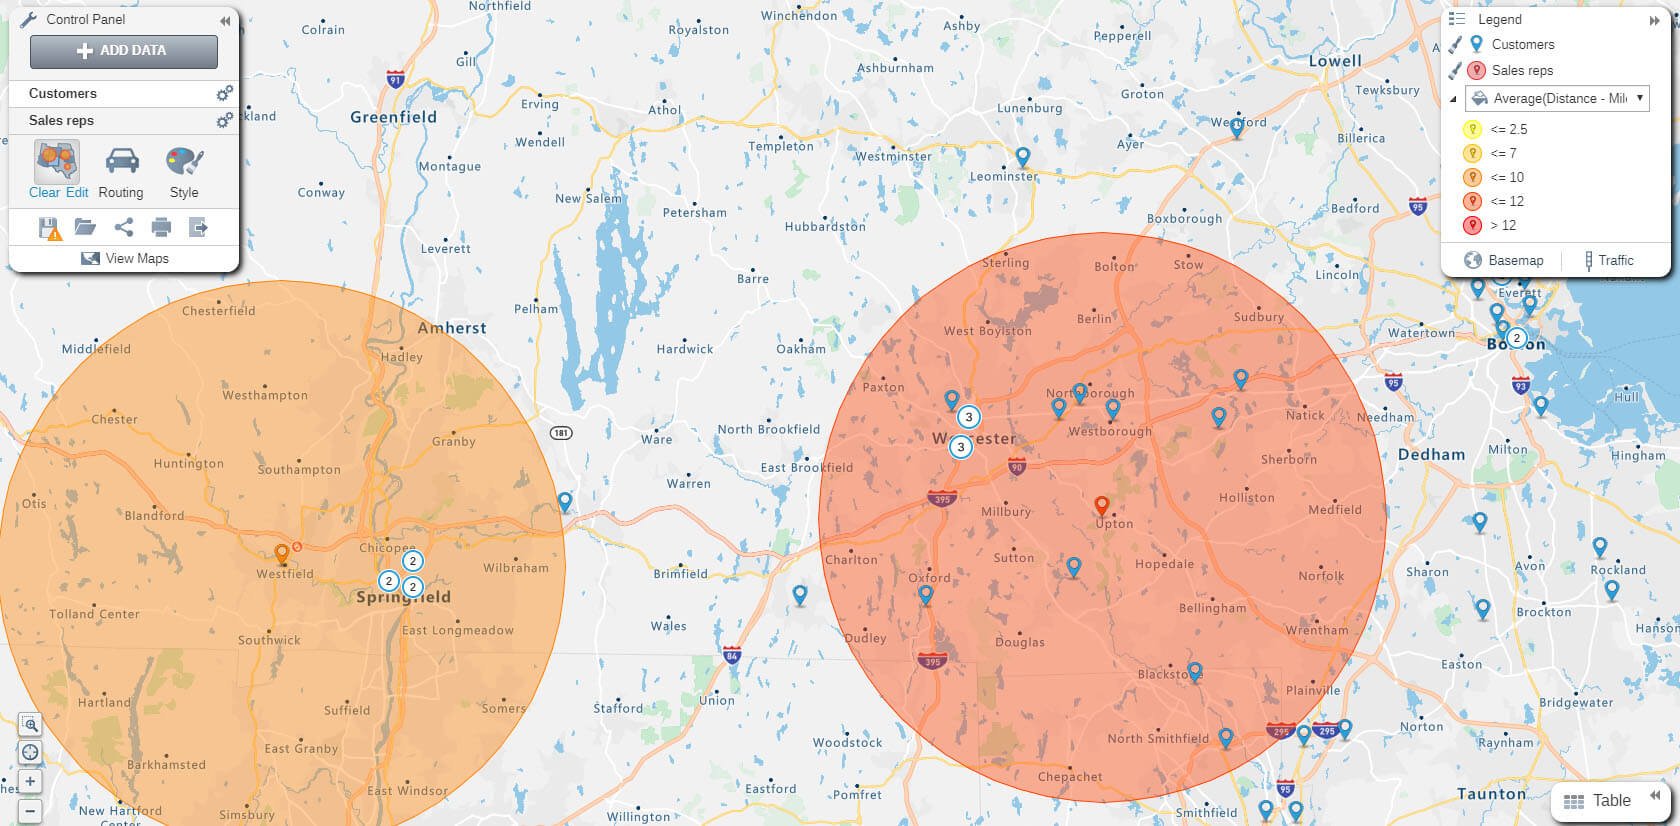 20-mile radius map with additional sales rep